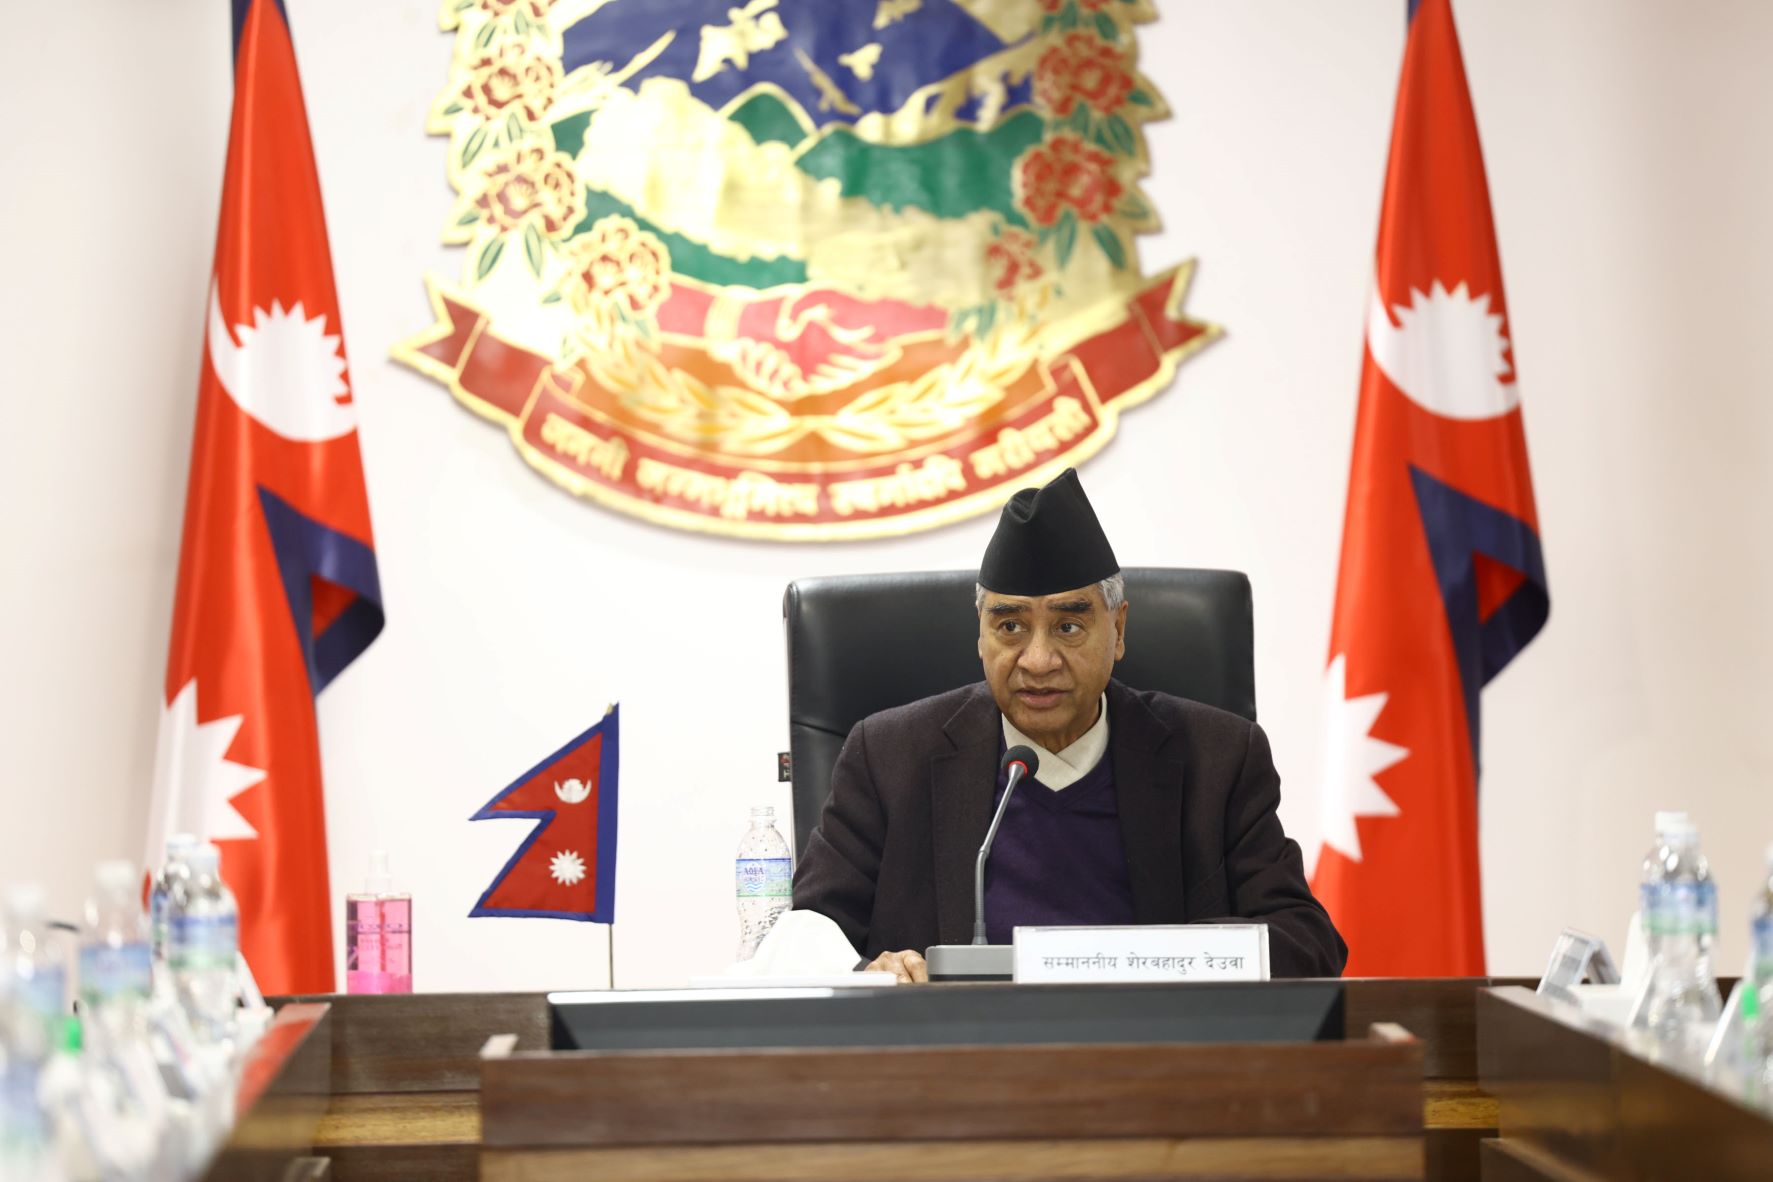 Govt’s duty to provide basic services to the people: PM Deuba